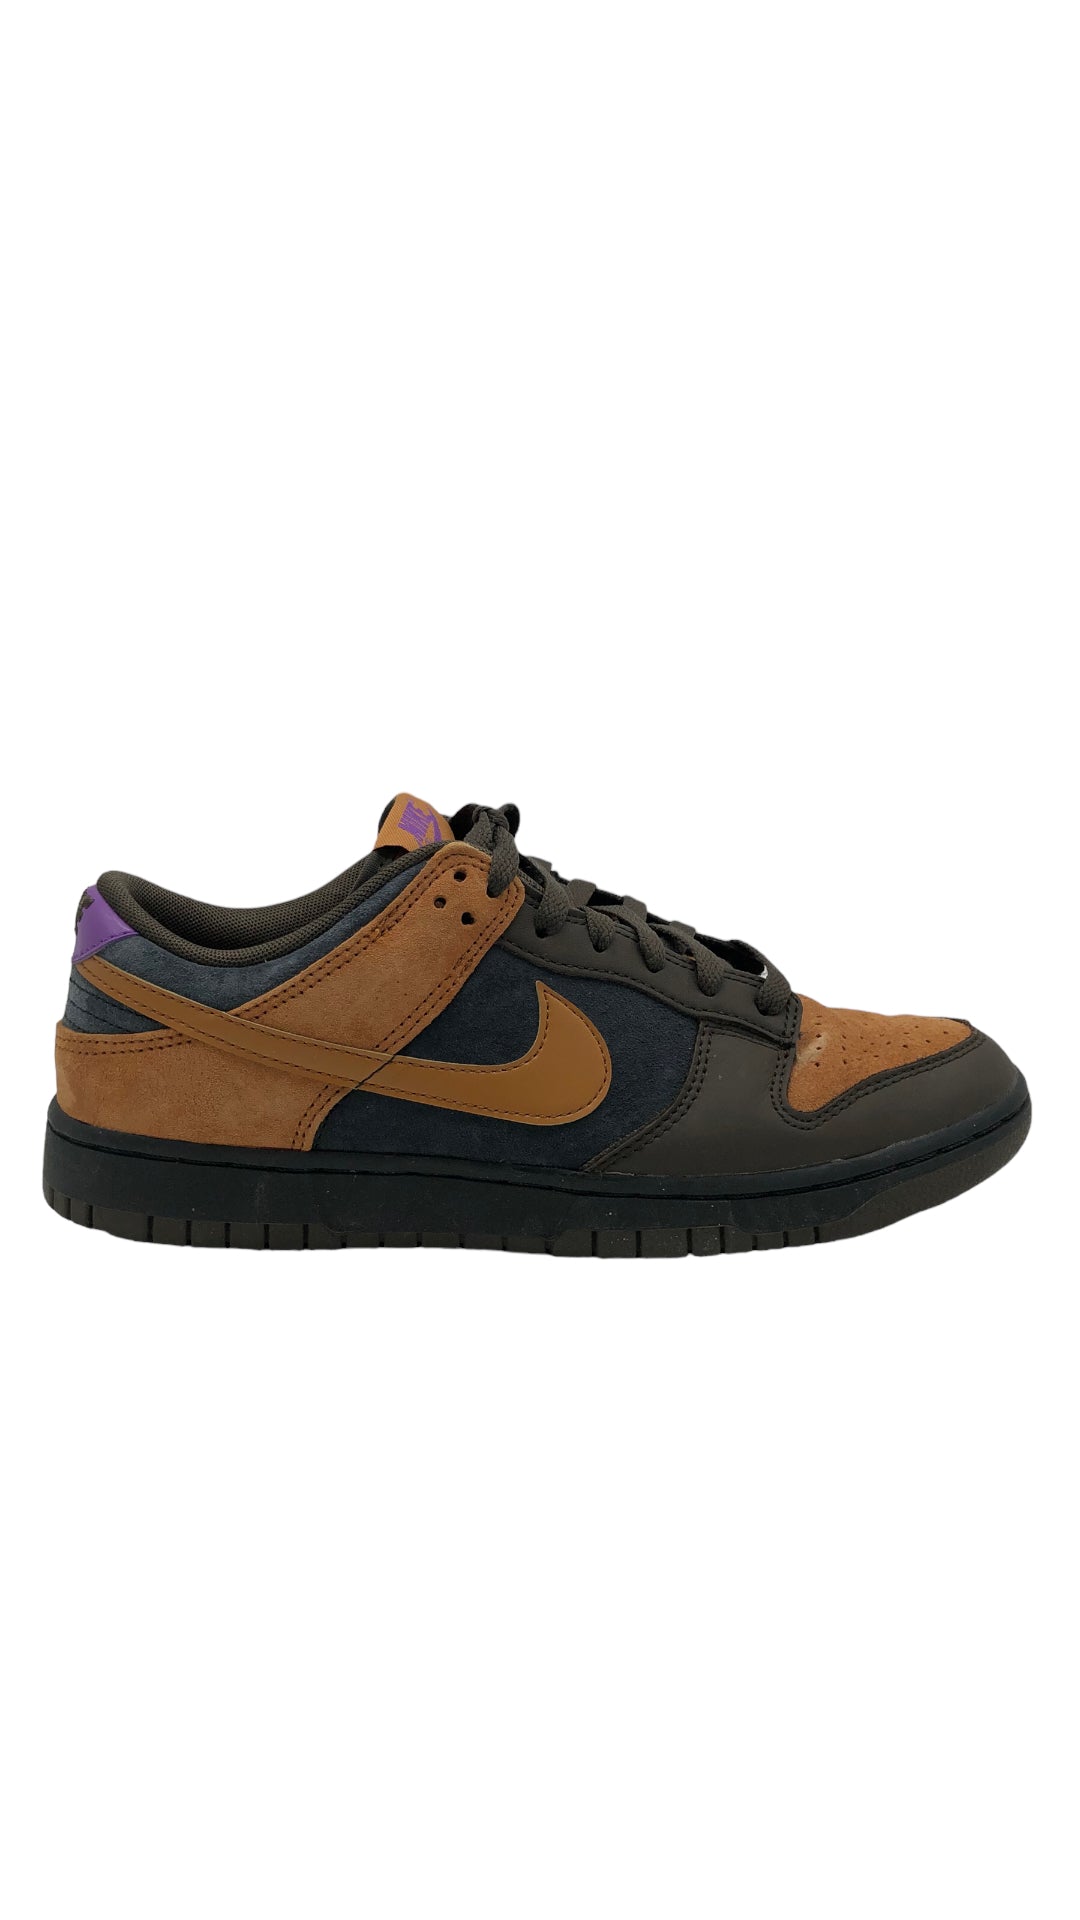 PreOwned Nike Dunk Low "Cider" Sz 9M/ 10.5W